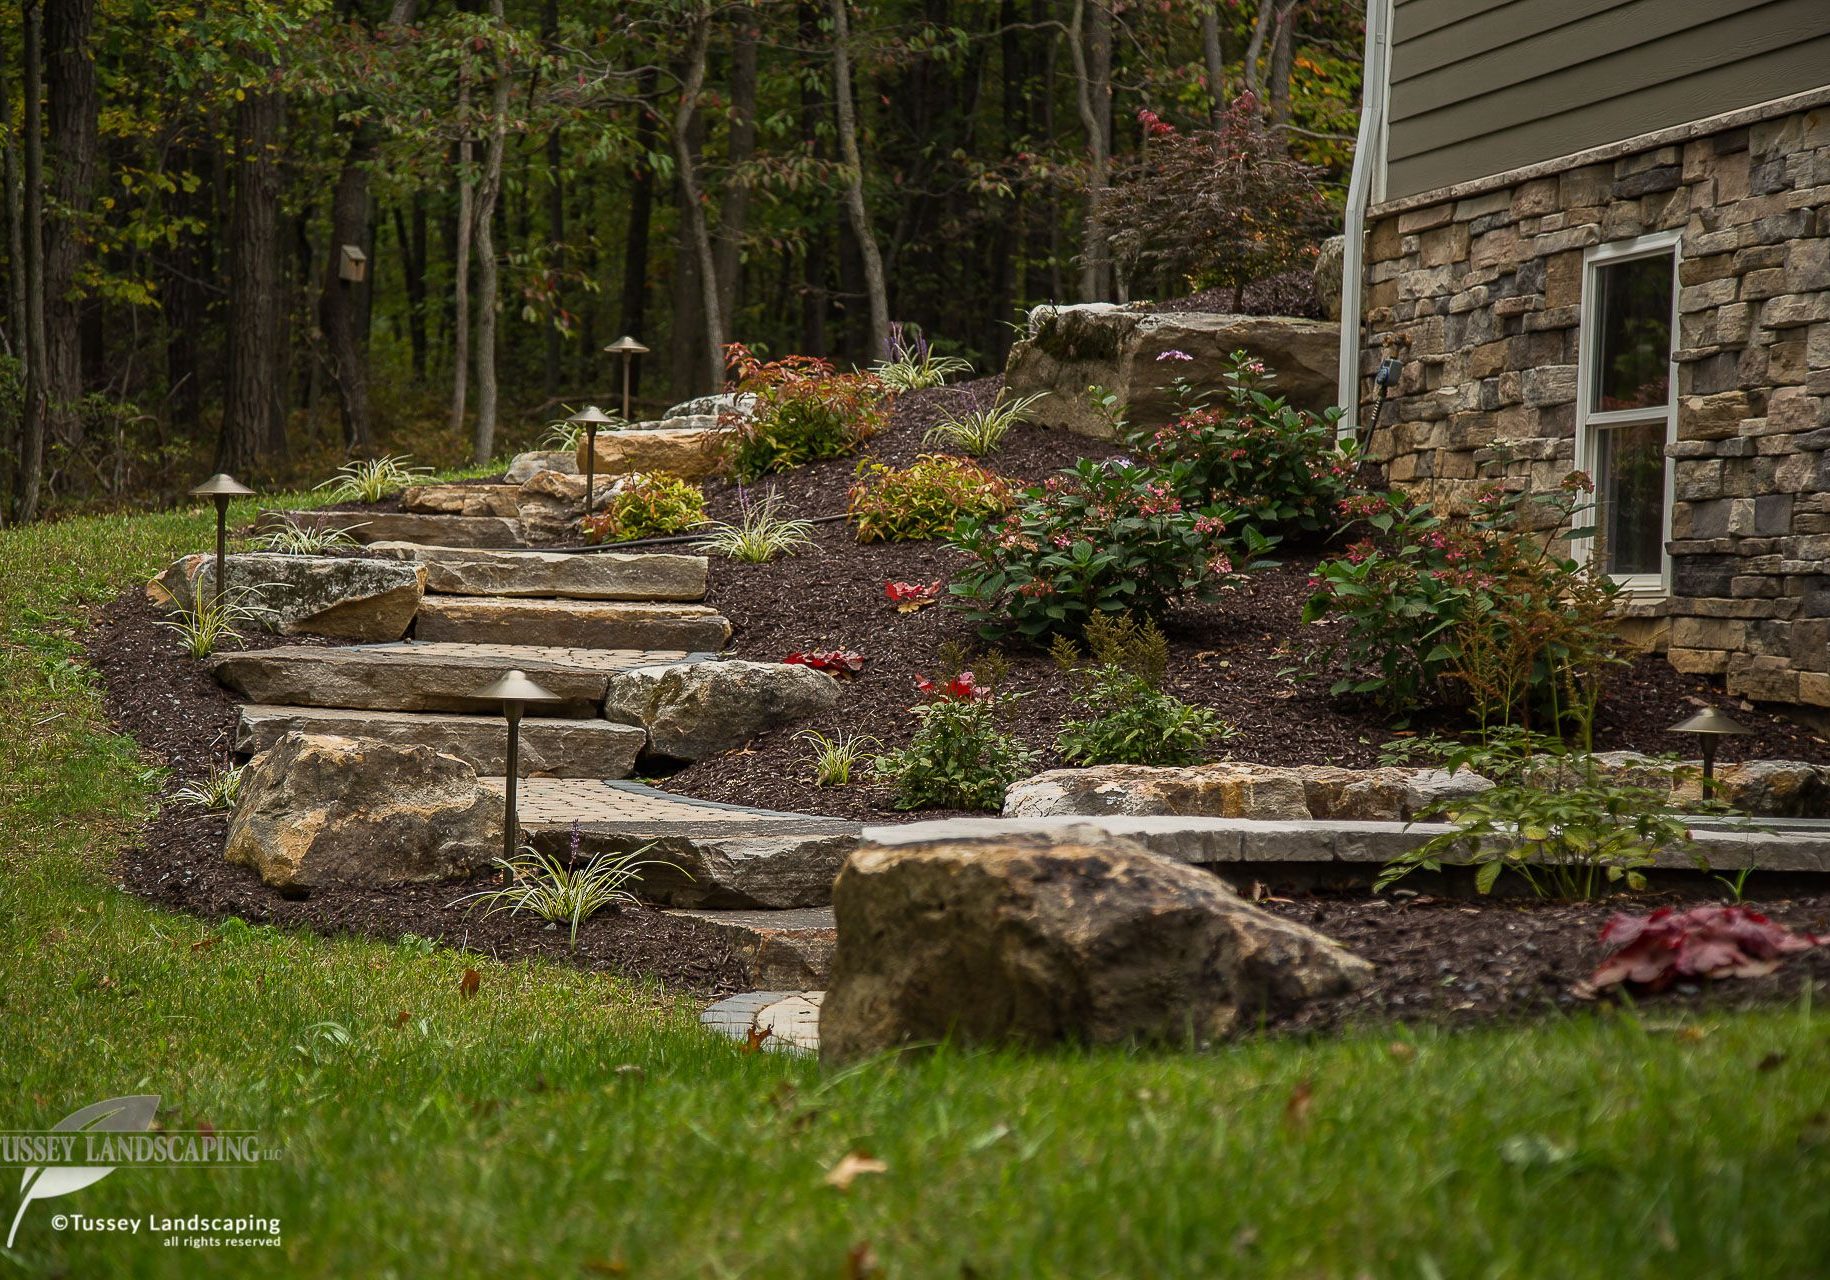 A stone walkway leading up to a house.